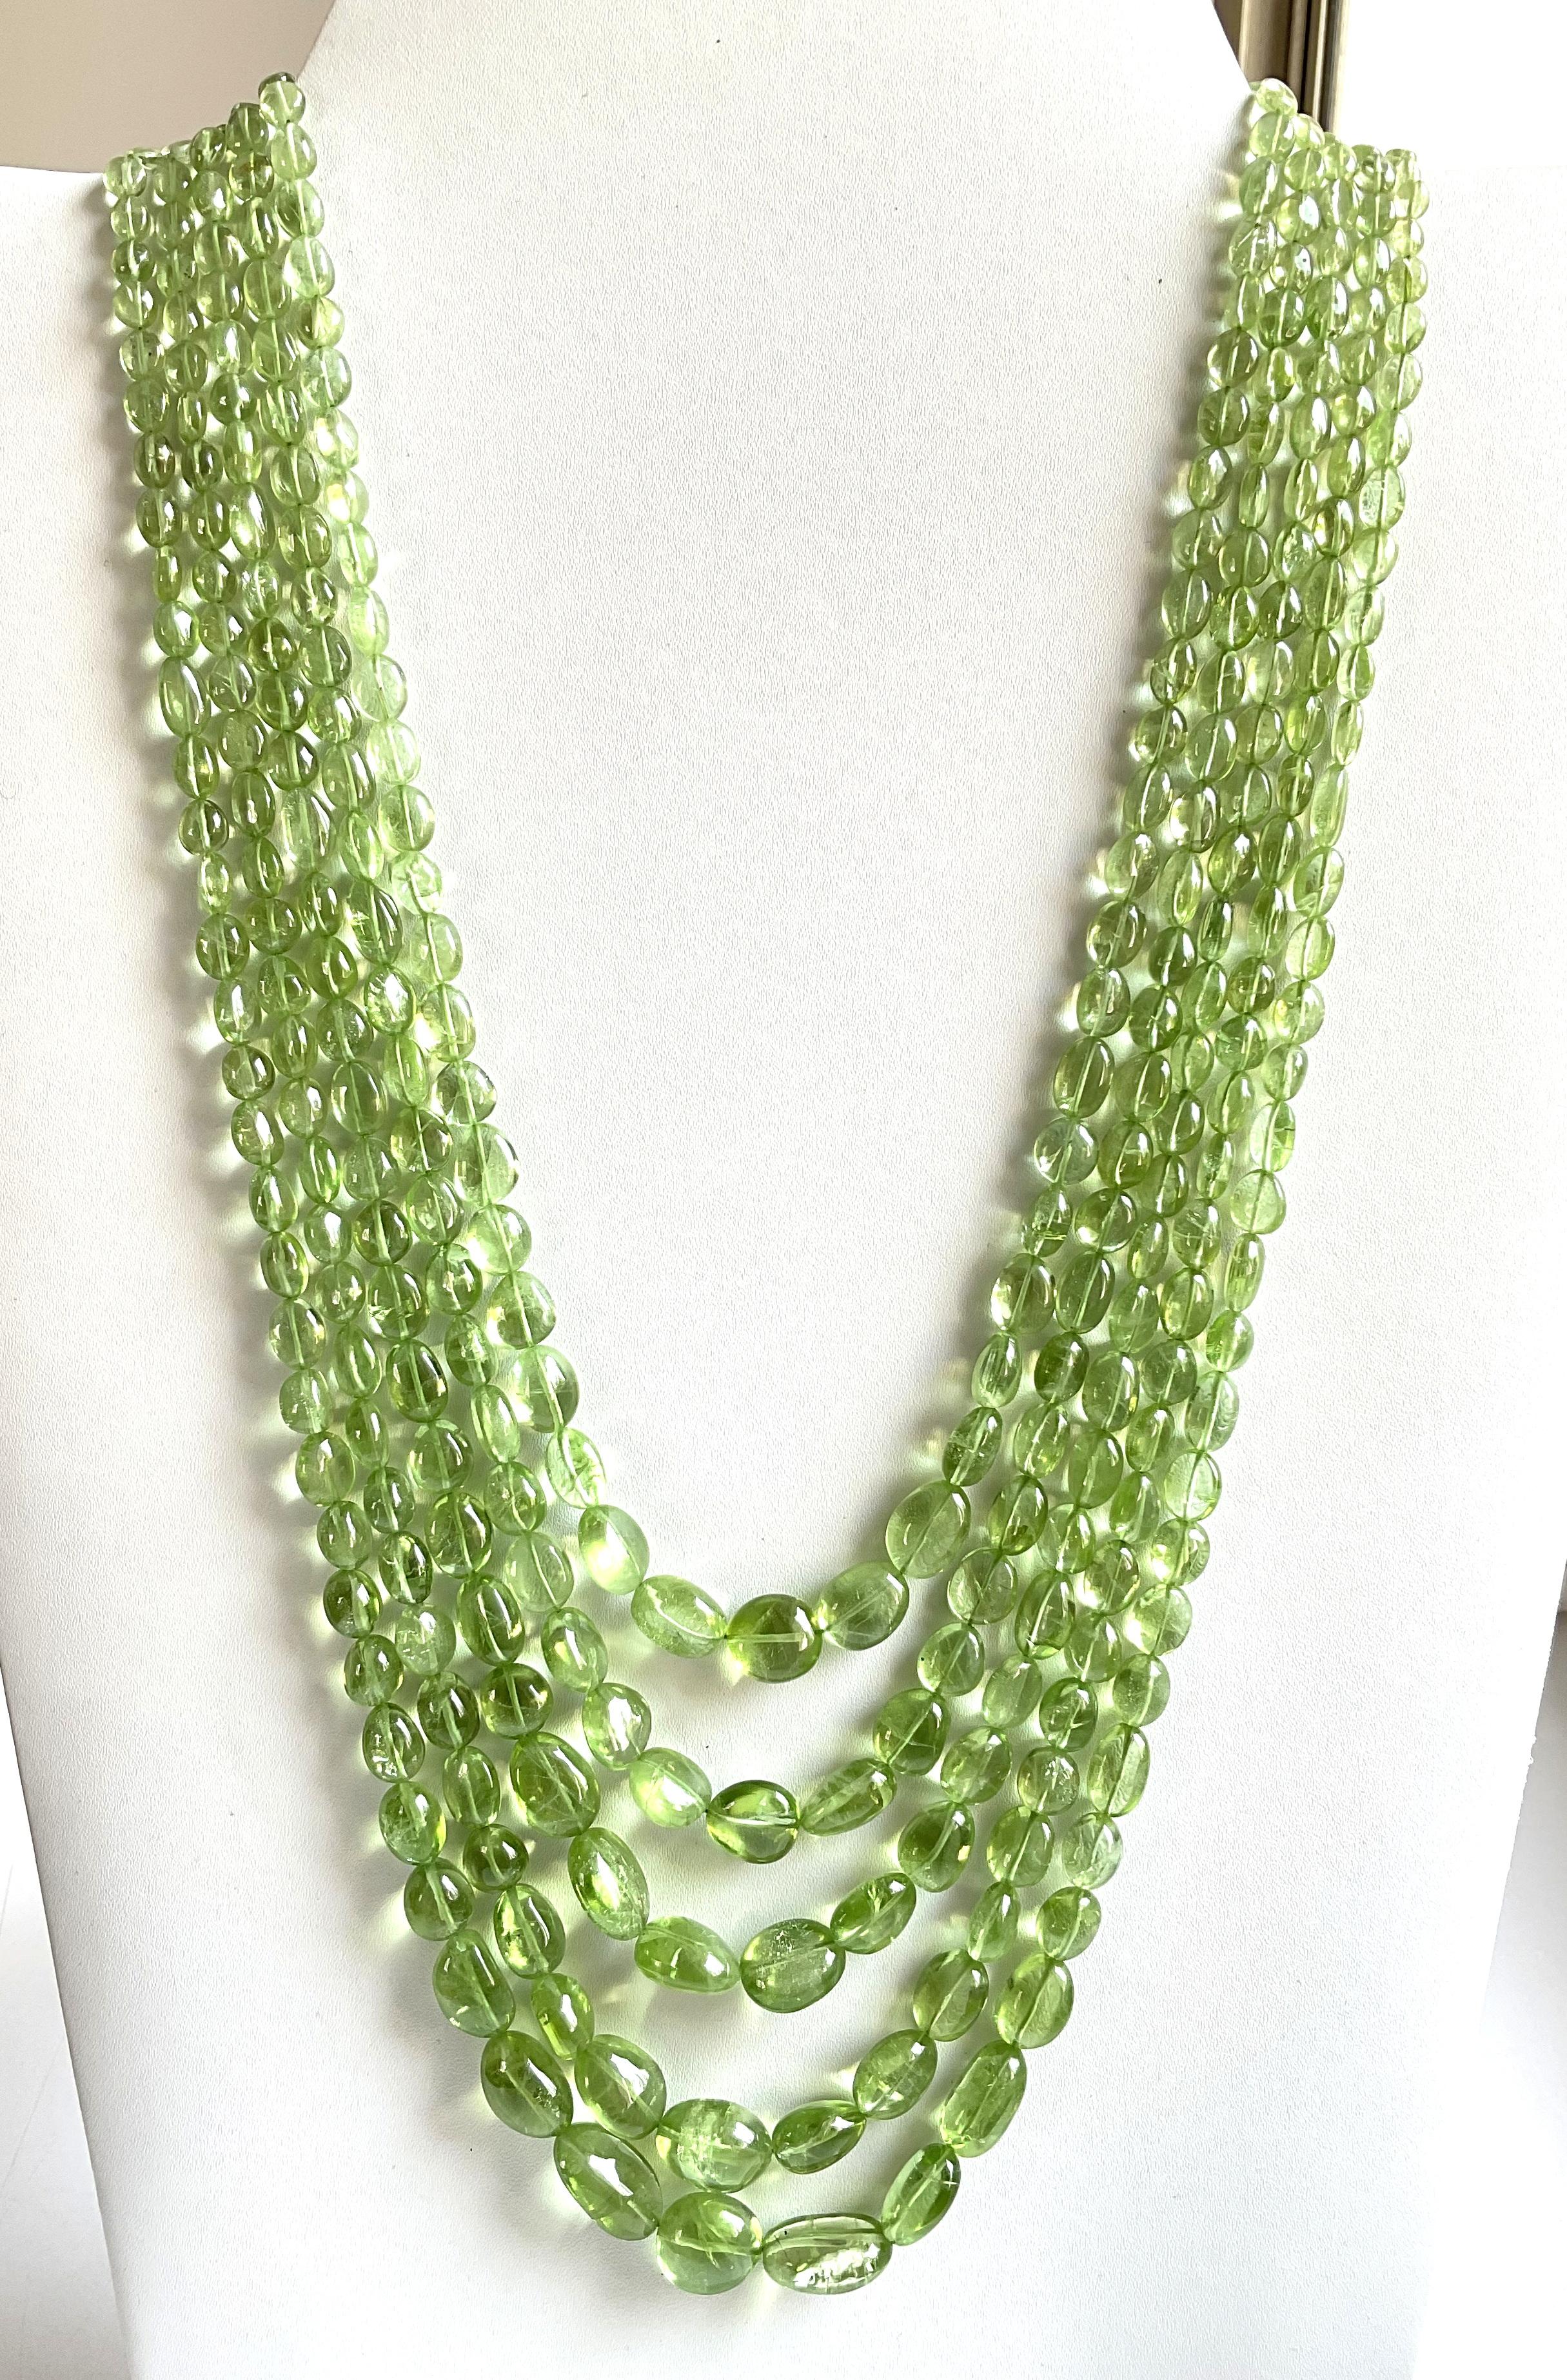 839.05 carats apple green peridot top quality plain tumbled natural necklace gem For Sale 1